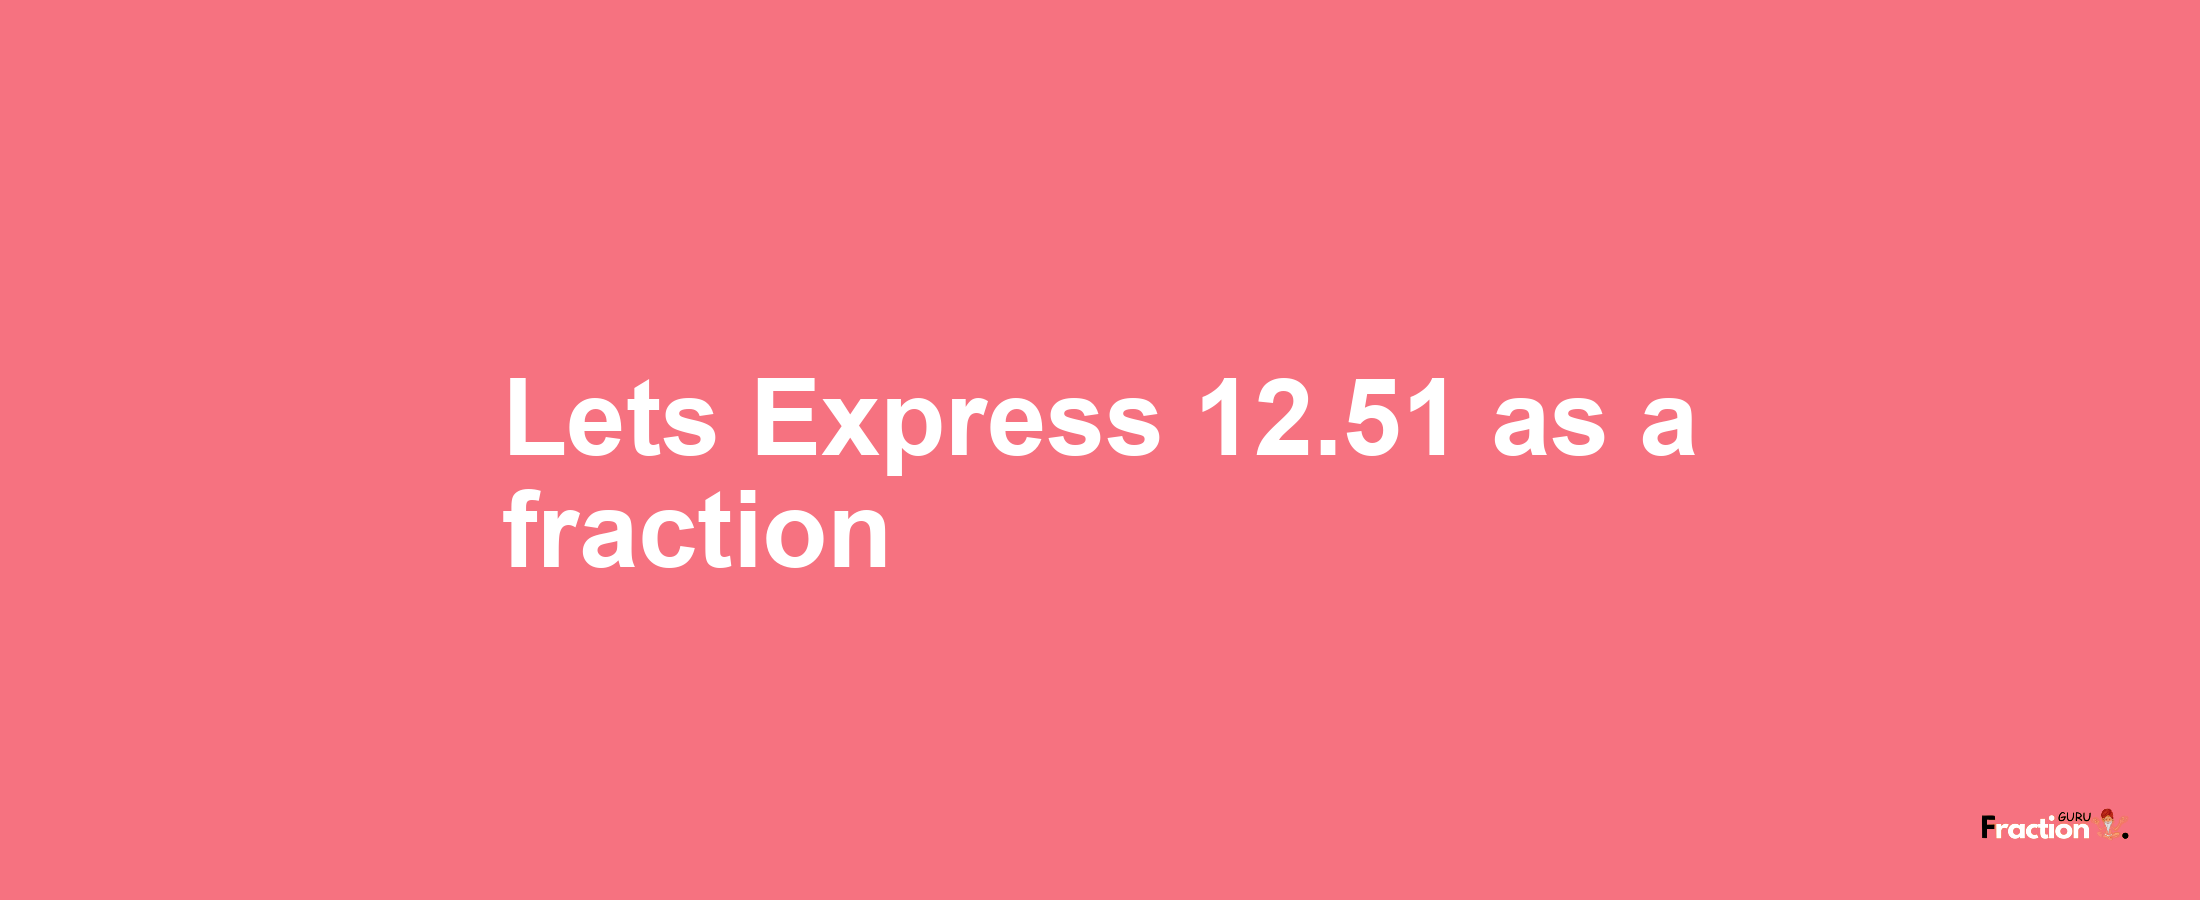 Lets Express 12.51 as afraction